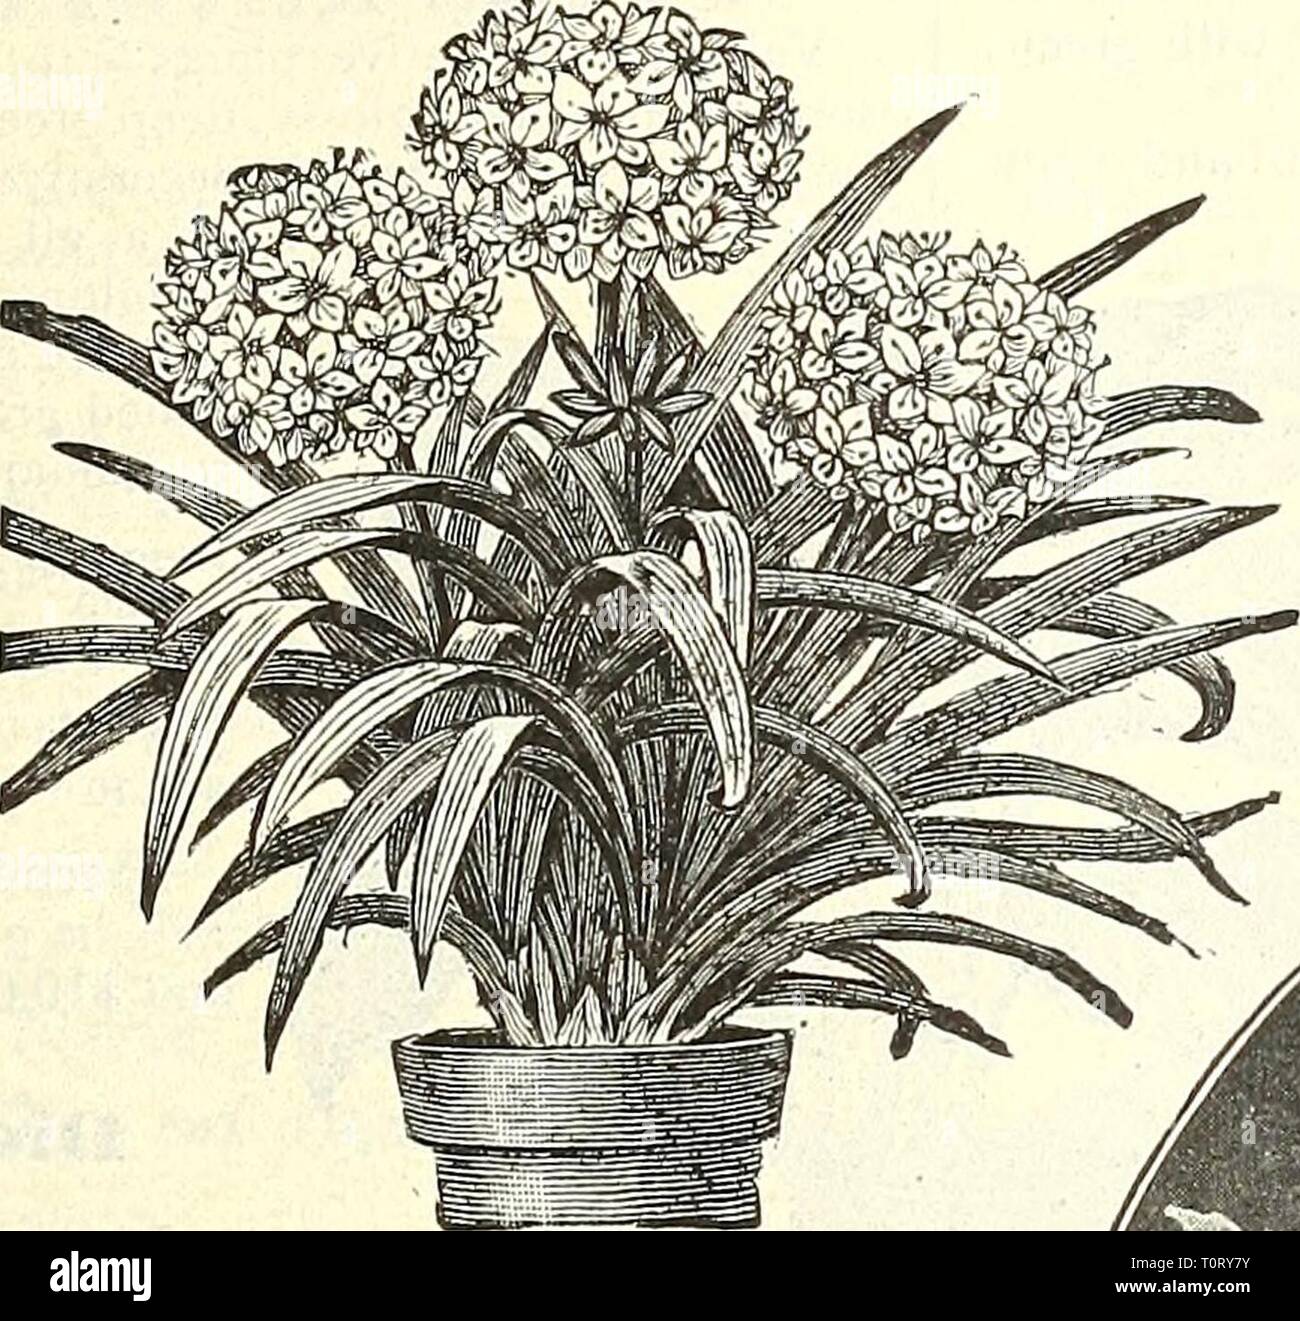 Dreer's garden book  1904 Dreer's garden book : 1904  dreersgardenbook1904henr Year: 1904  Chstkum Pakqui. CAREX. Japonica Variegata. An oina- meiual Japanese grass which is ex- tremely useful as a house plant, of easy growth, standing the dry atmosphere of heated rooms with impunity, and at the same time hardy if planted out in the garden in summer. 15 cts. each; 4 for 50 cts. CESTRUM PARpUI. (Nigiit-blooiuing Jessainiue.) A beautiful tender shrub of easy cultivation, with small greenish-white flowers, of delightful fragrance, which is dis- pensed during the night only. 15 cts. each ; $1.50 p Stock Photo